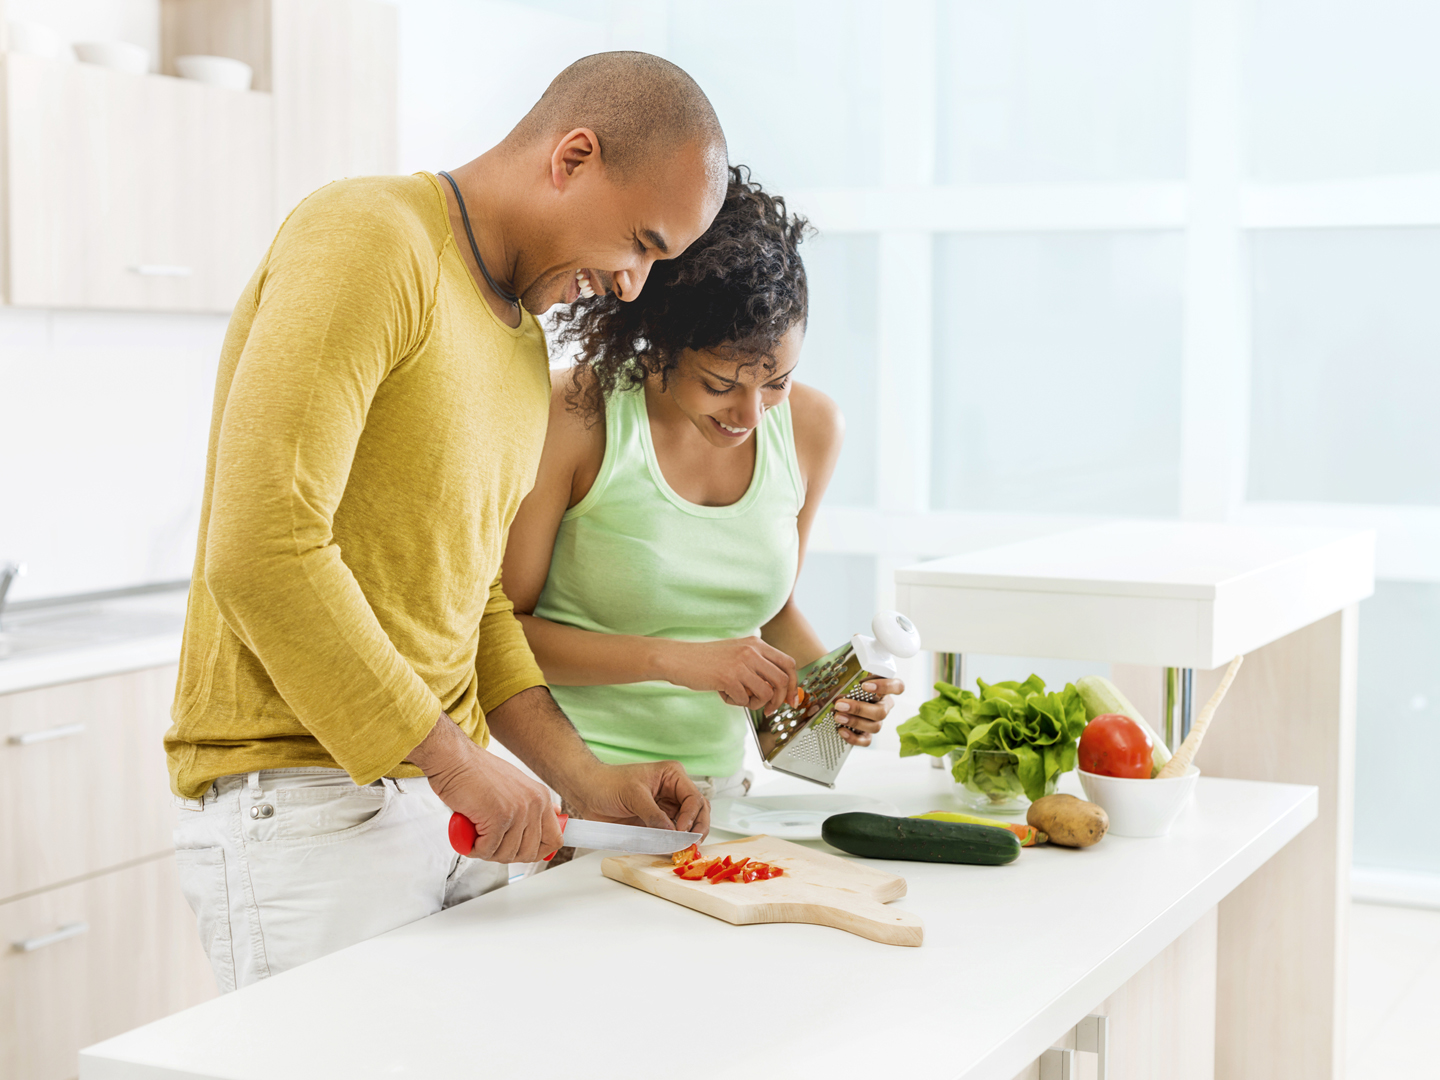 Smiling African American couple preparing food together in the kitchen.